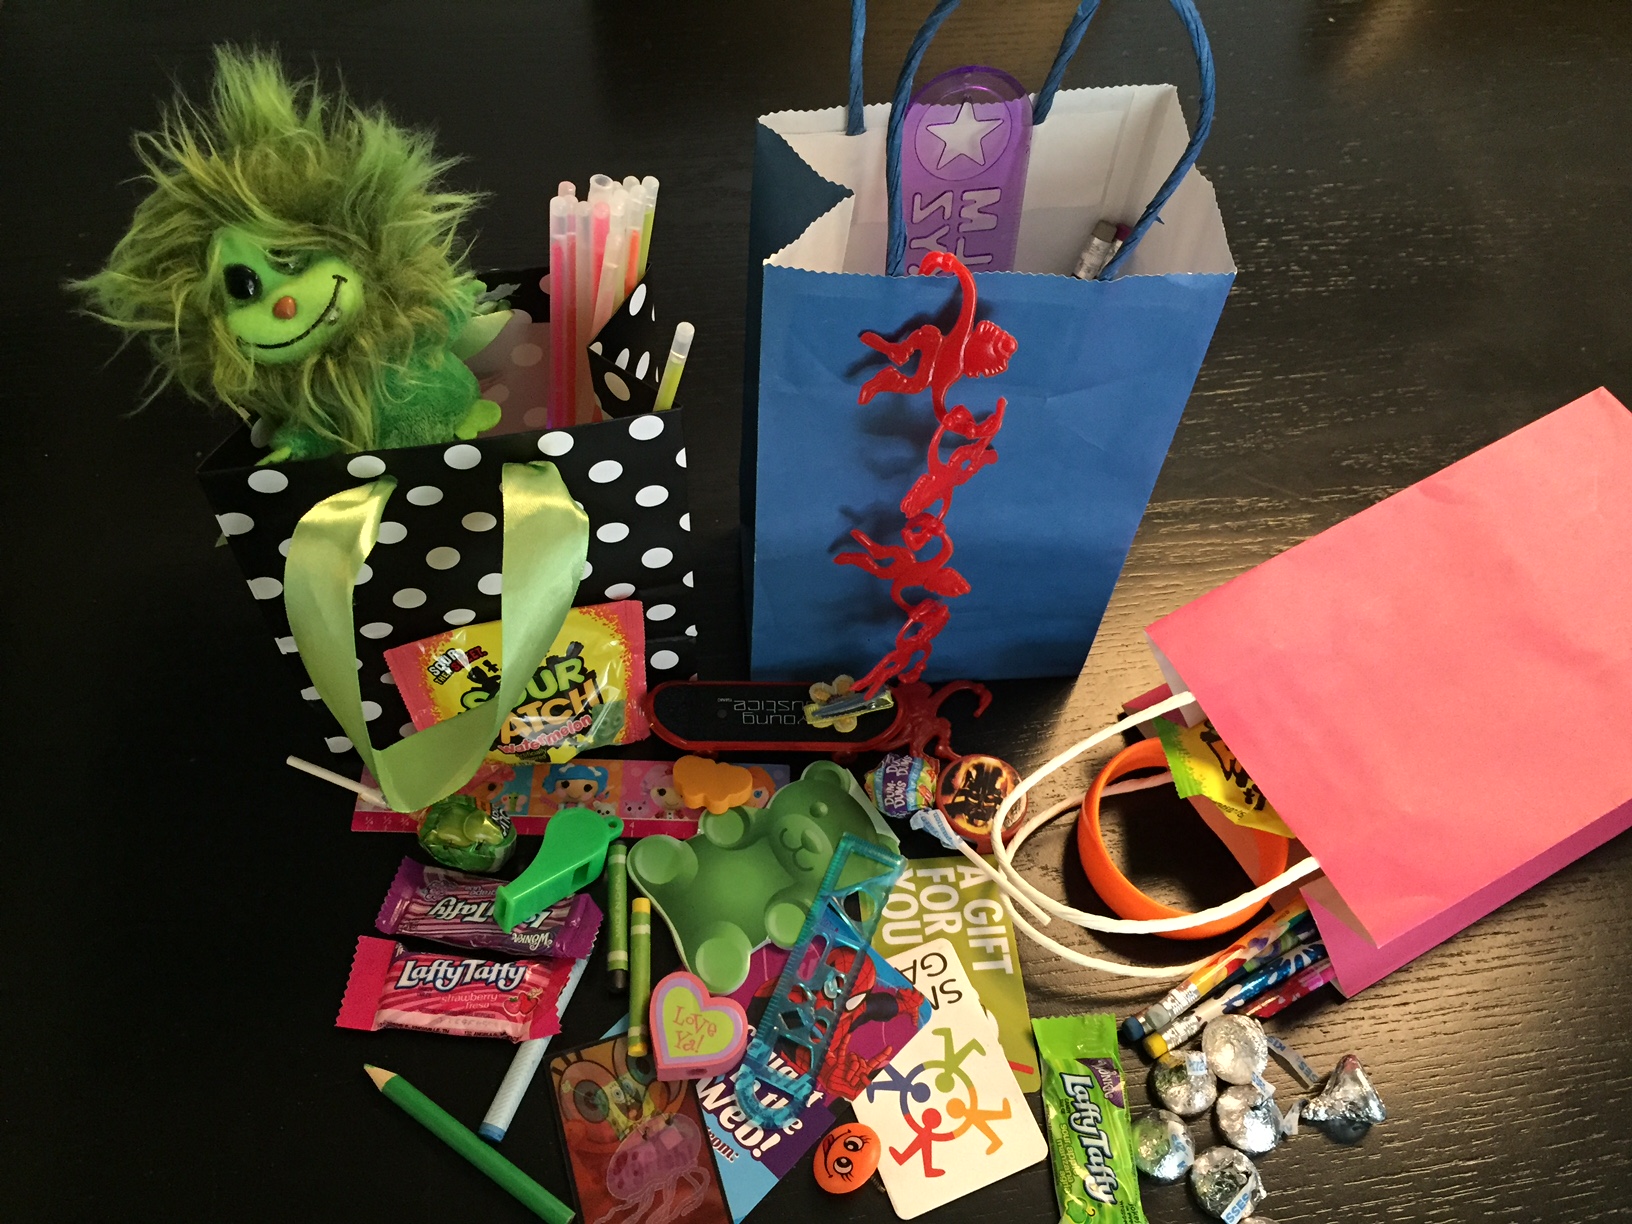 Goodie bags for birthday party, goodie bags, birthday party bags